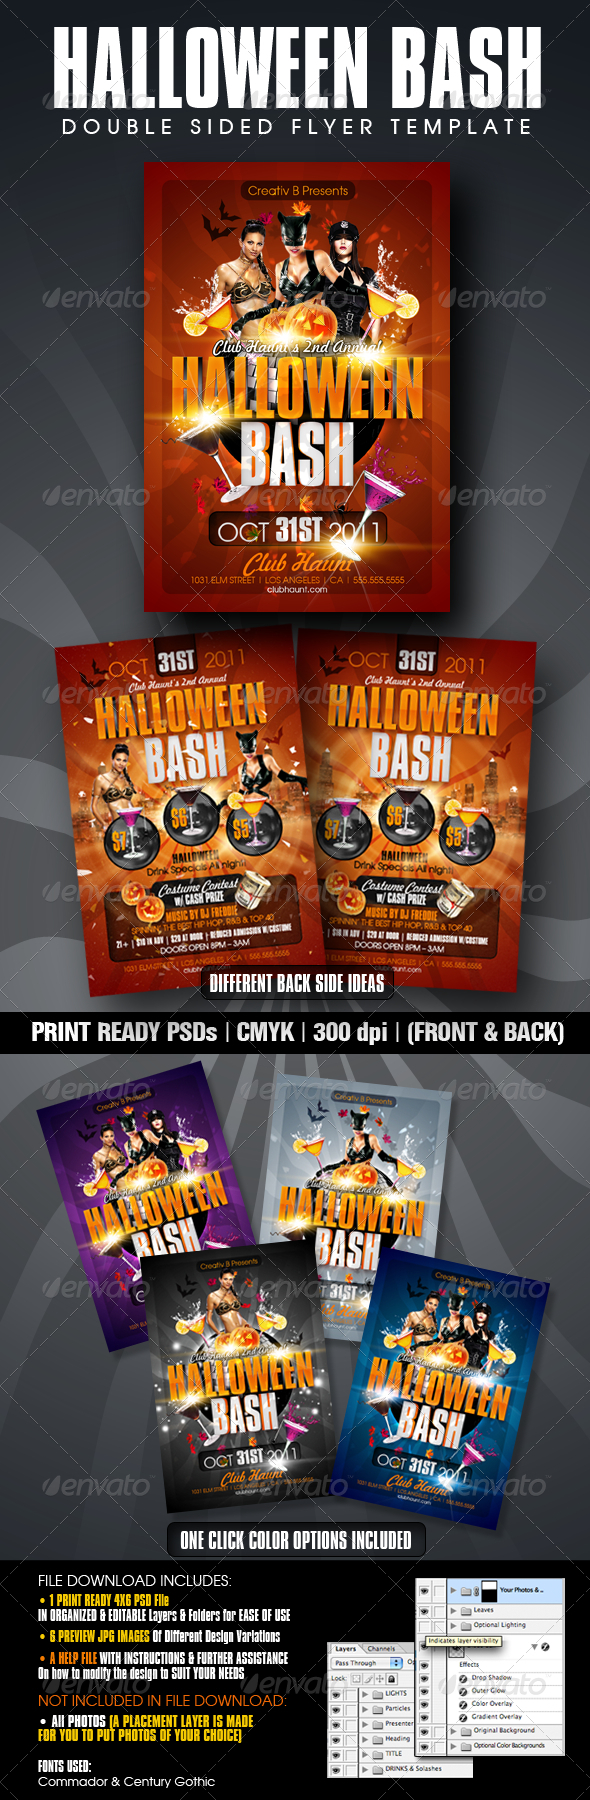 Costume Contest Flyer Template from previews.customer.envatousercontent.com